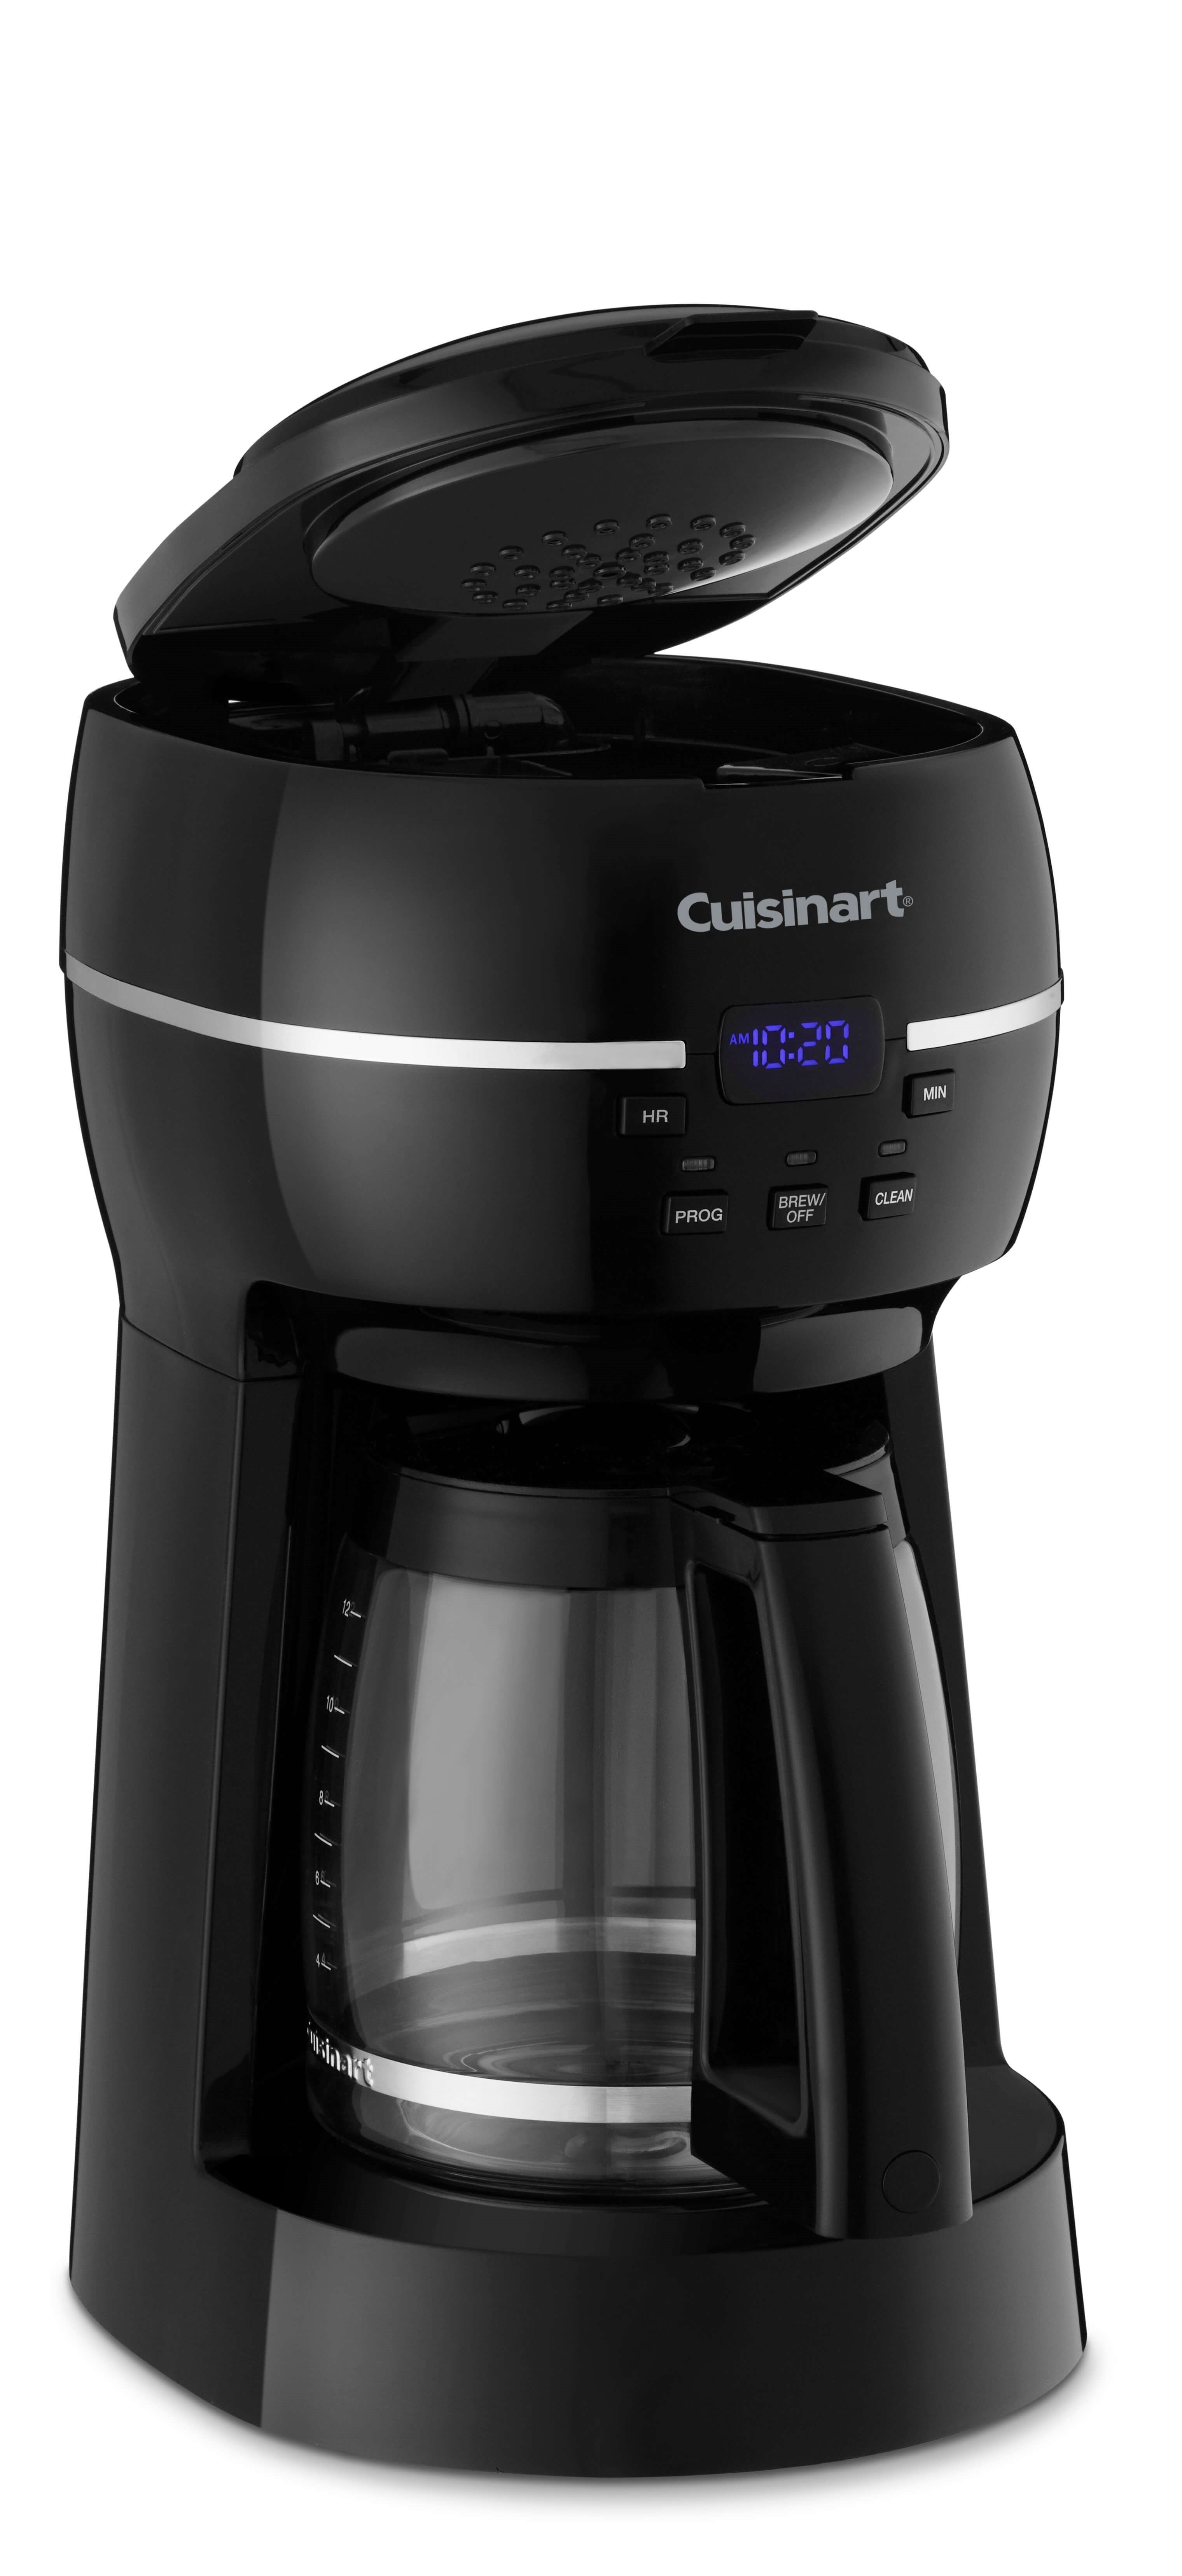 Cuisinart 12-cup Programmable Coffeemaker - Stainless Steel - Dcc